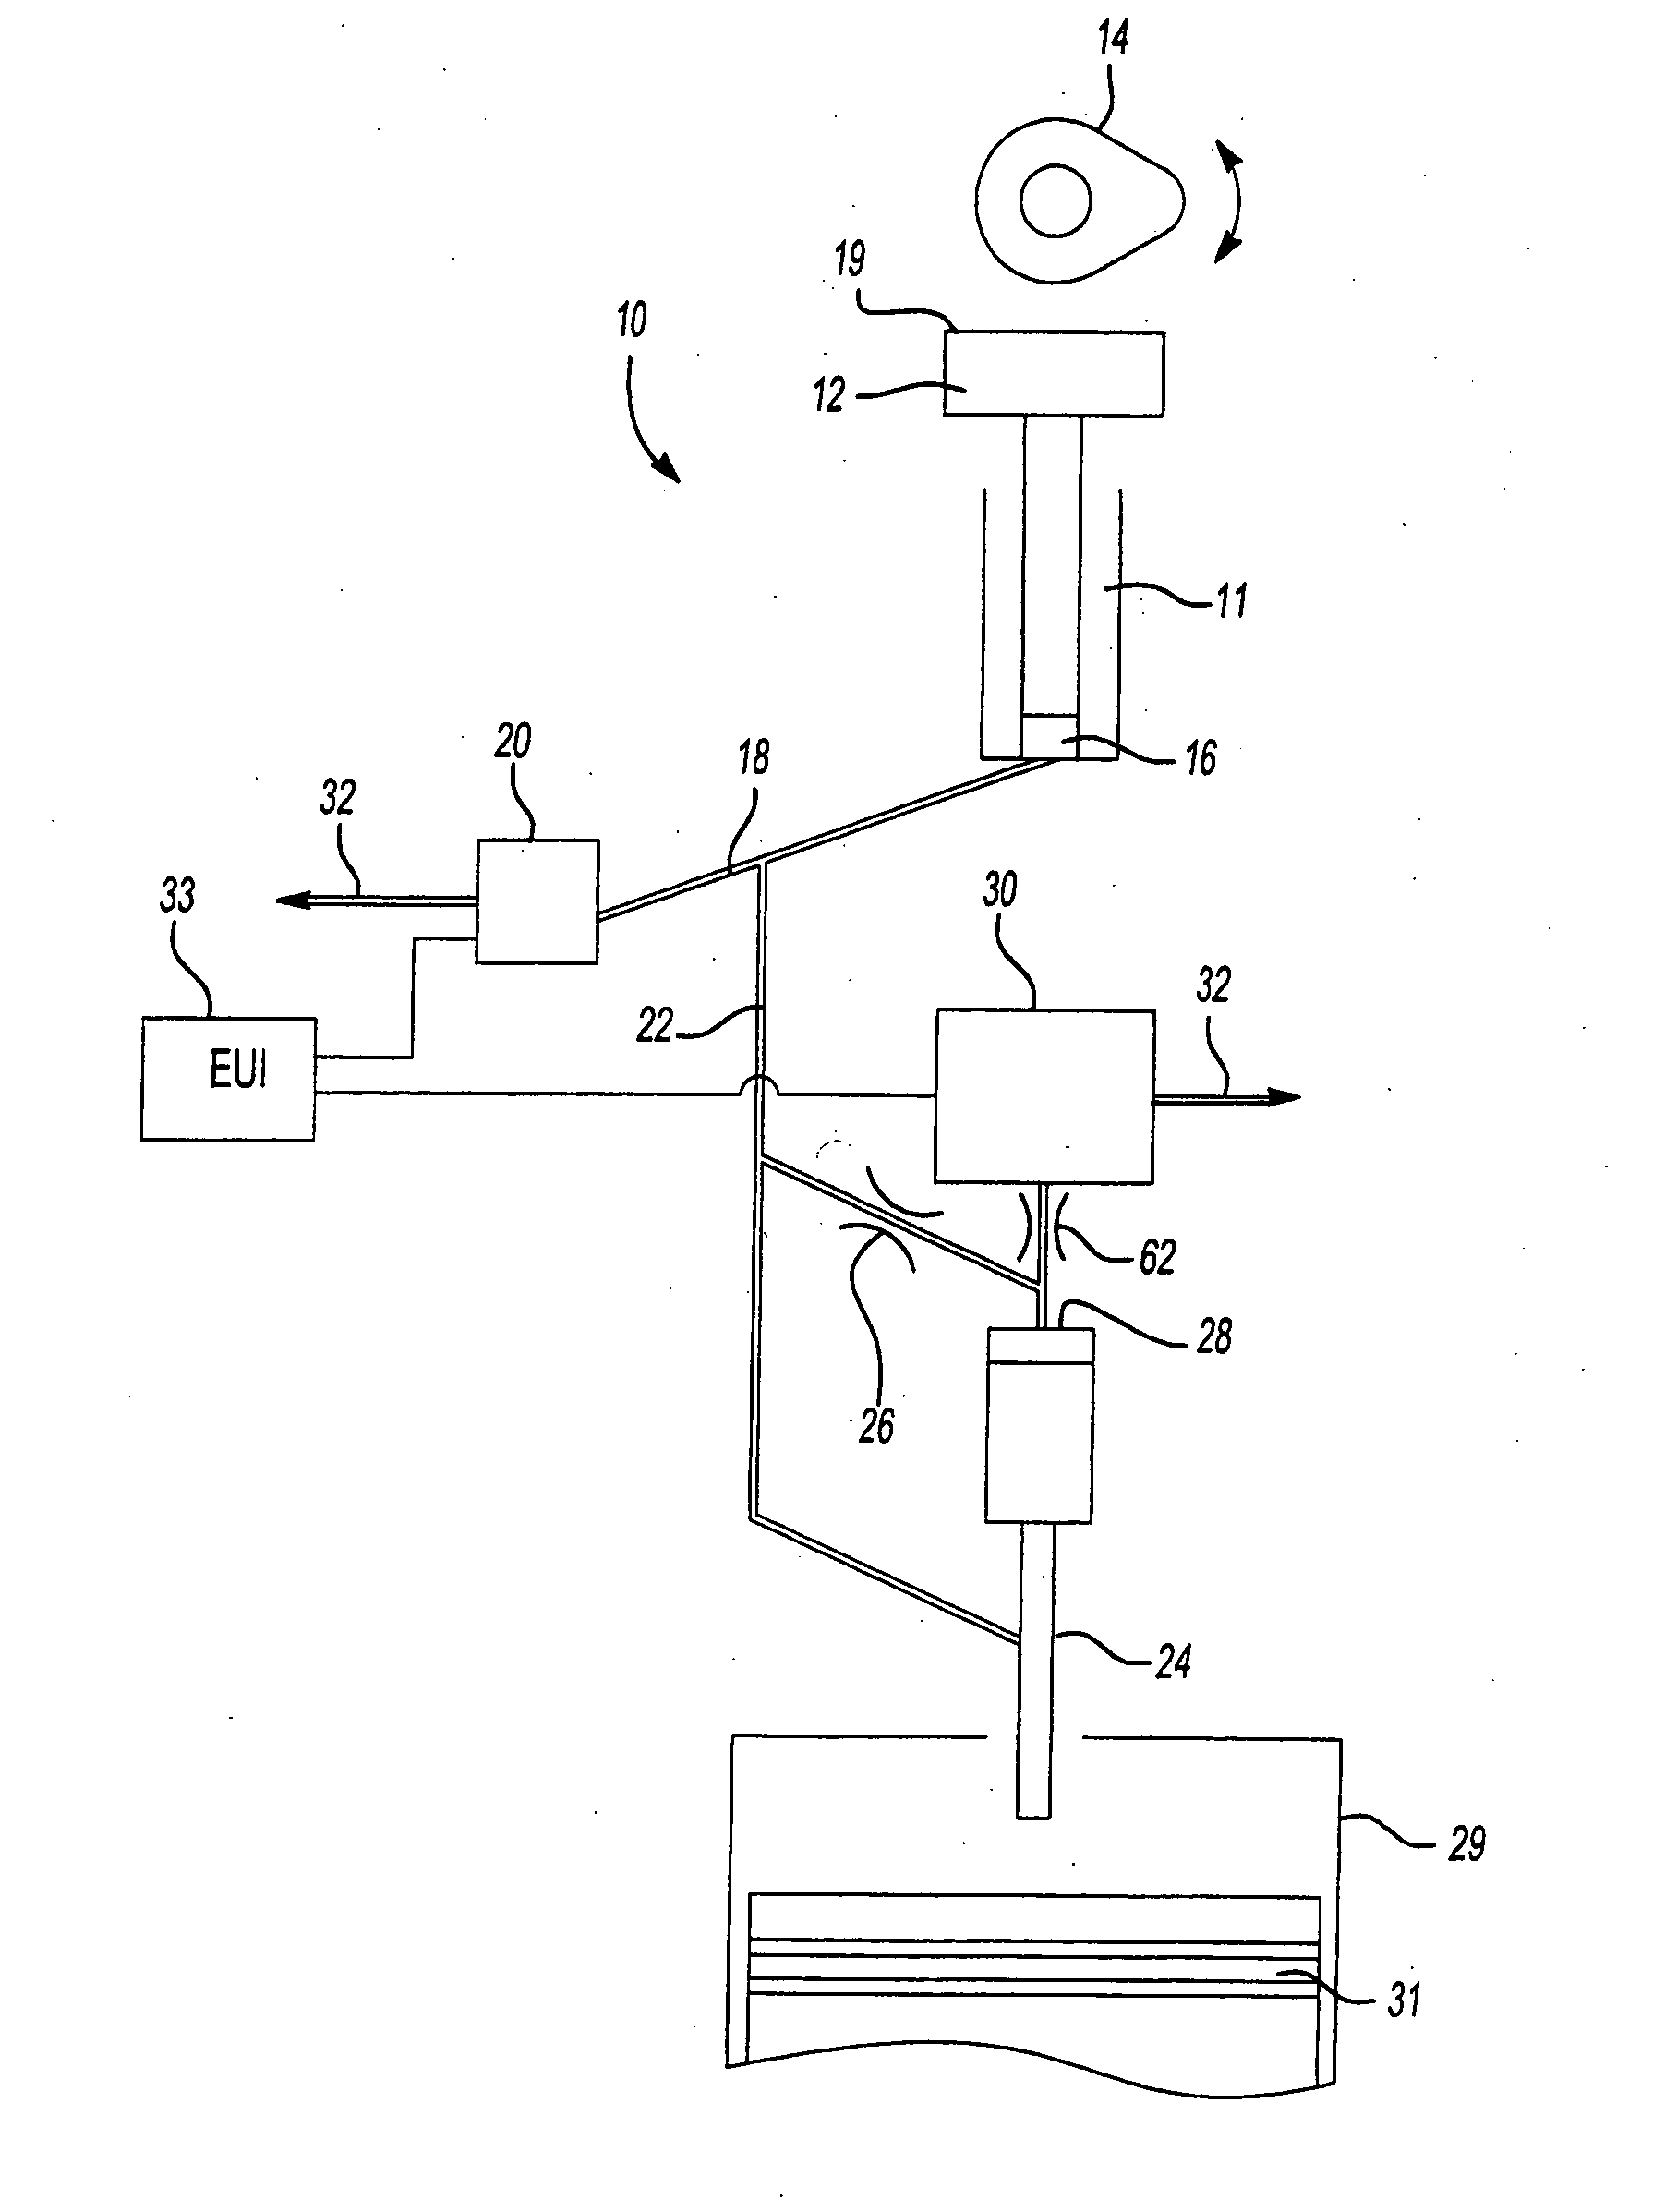 Fuel injector with dual piezo-electric actuator